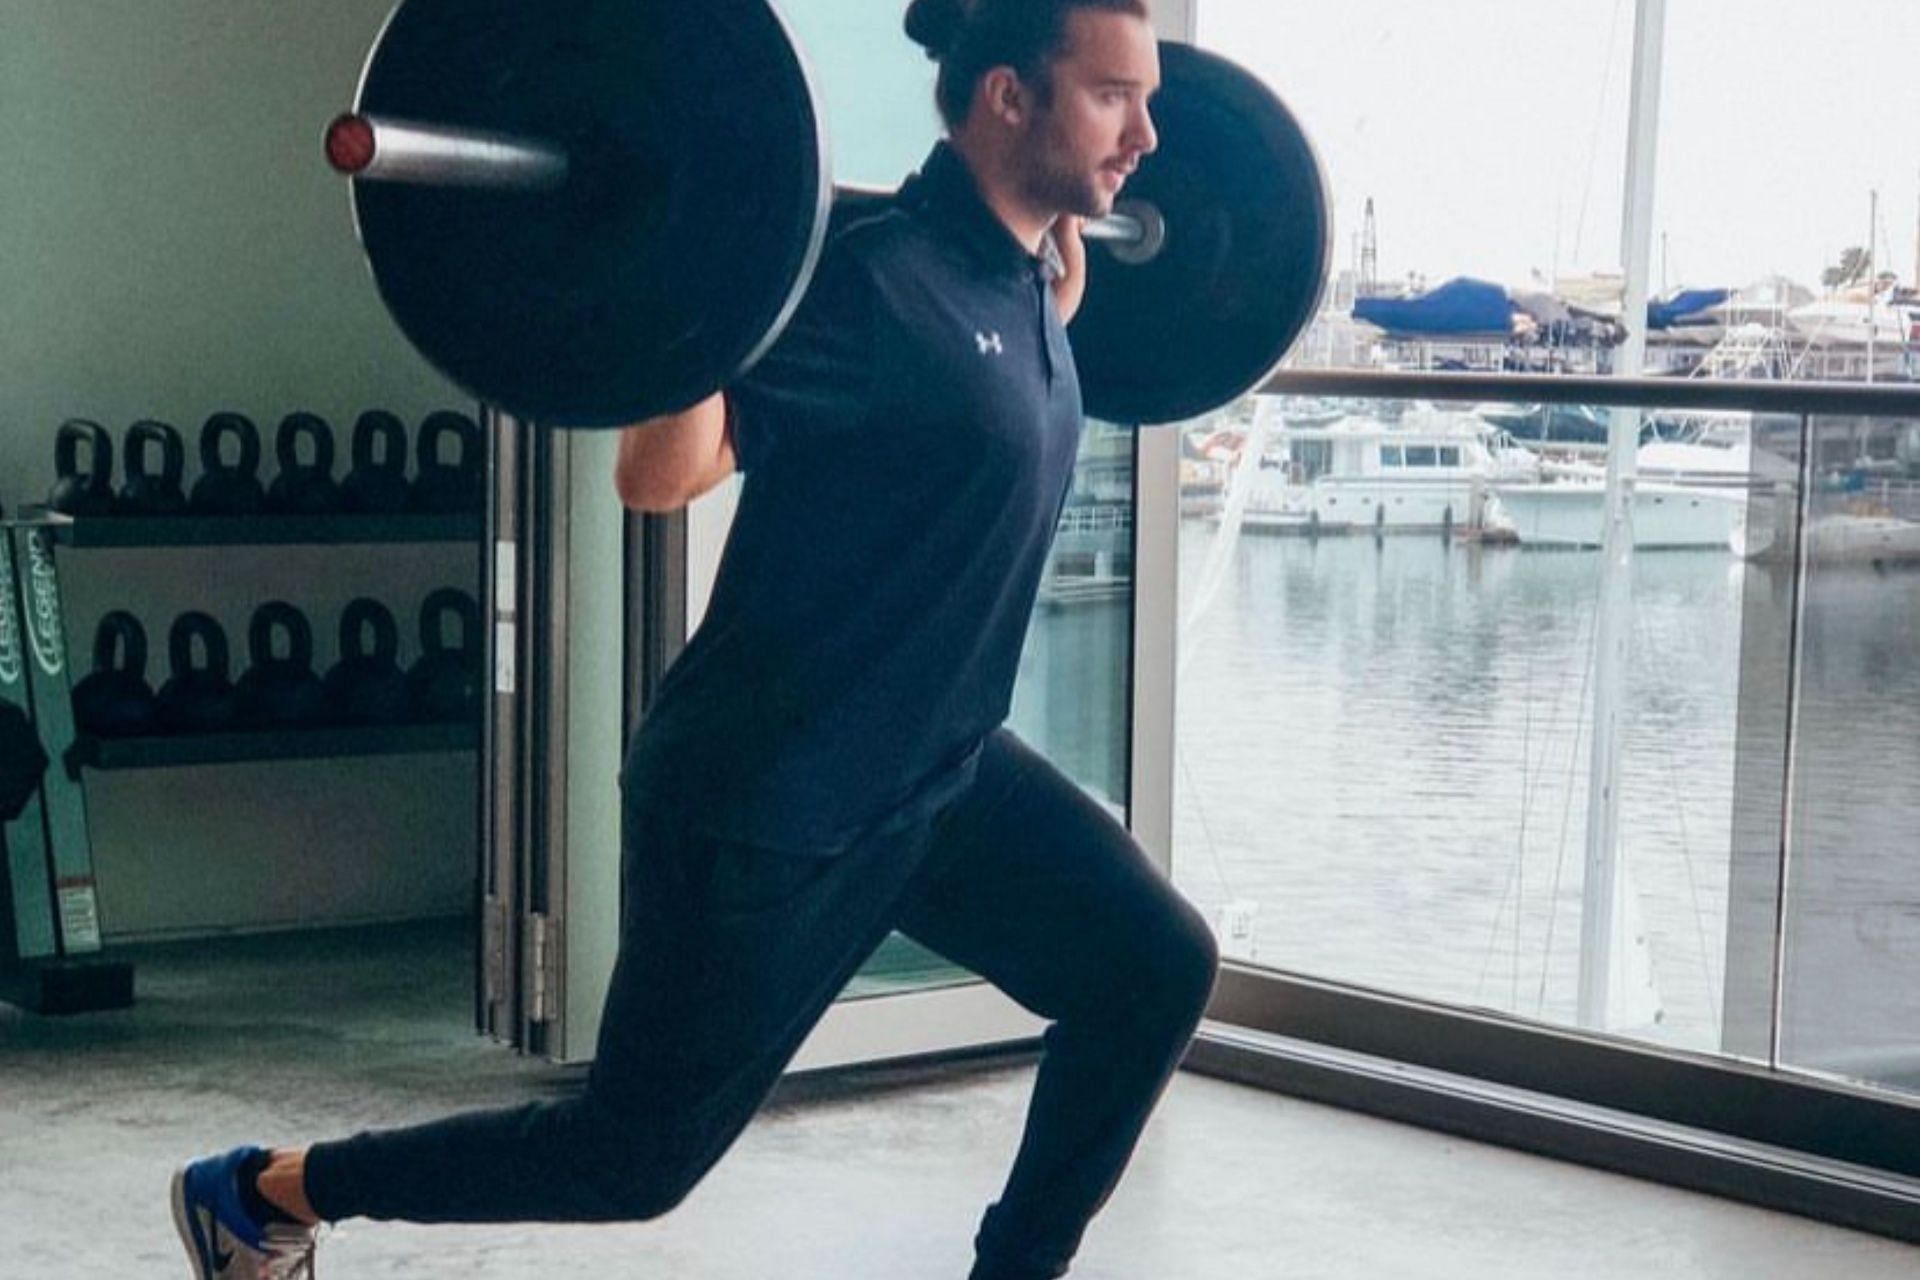 Barbell lunges target several lower-body muscles (Photo via Instagram/thelookfitness)